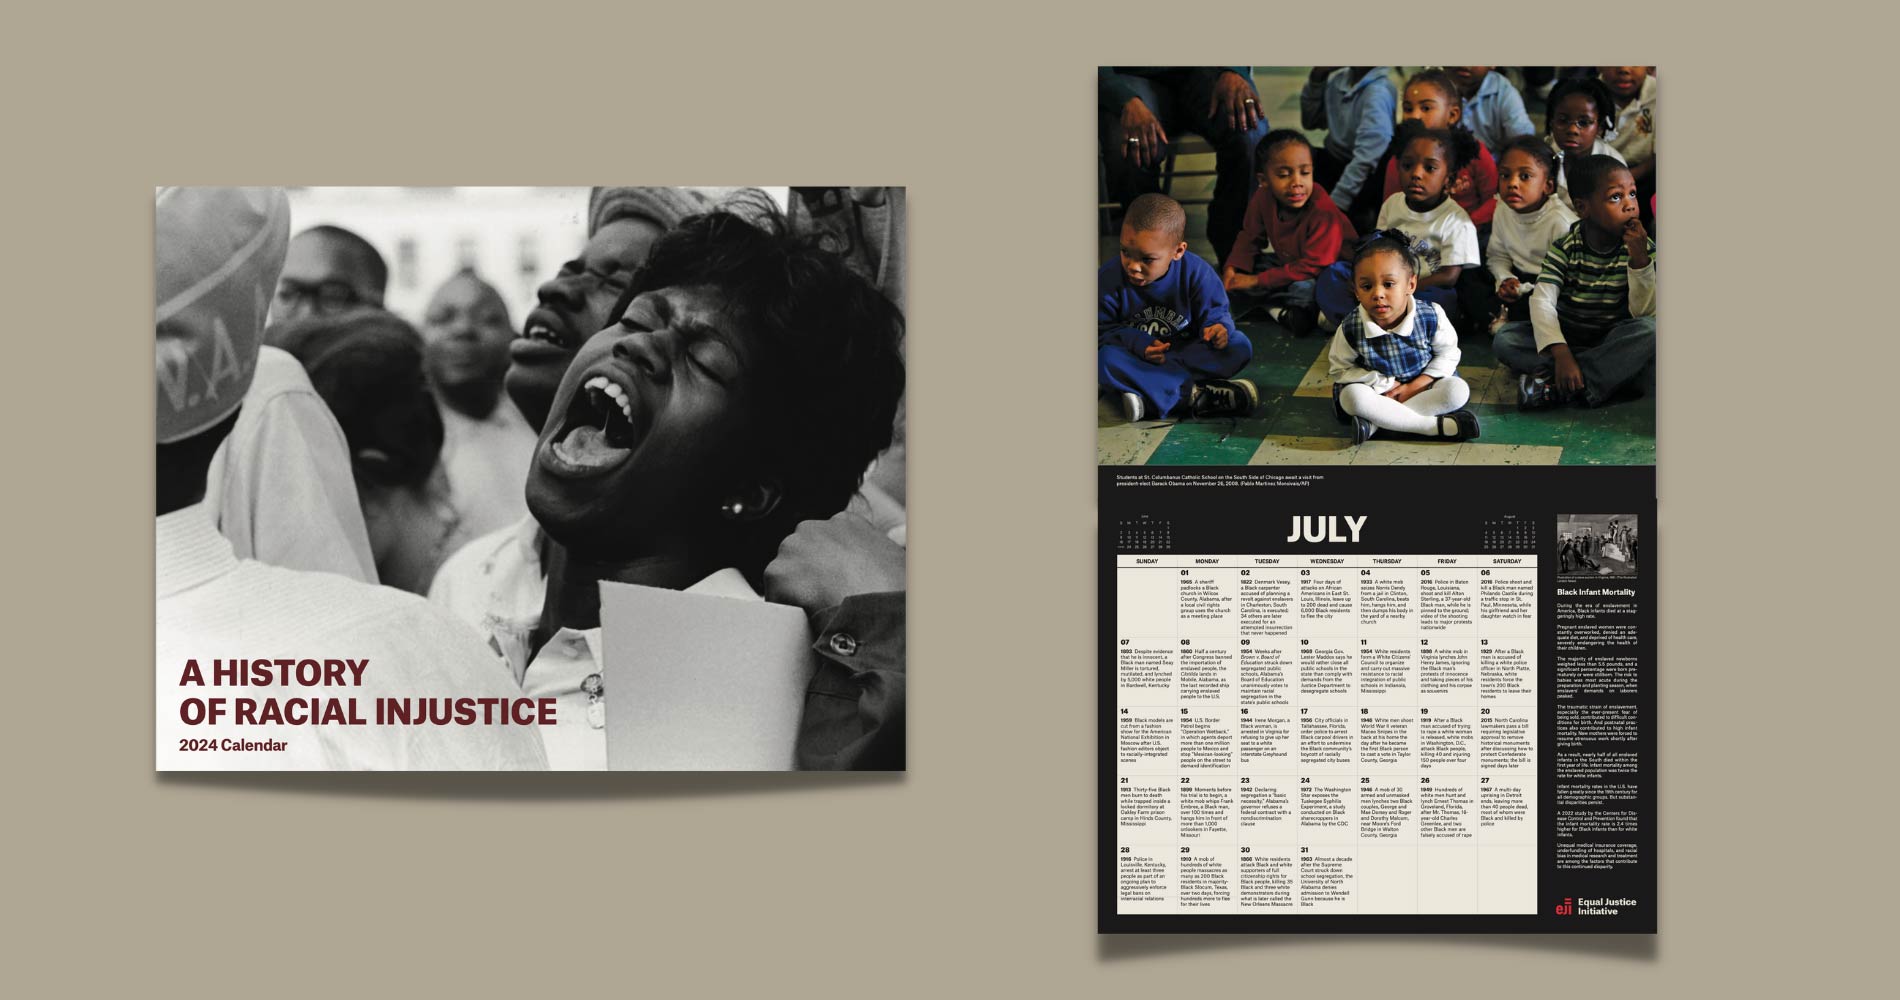 Our 2024 History of Racial Injustice Calendar Is Now Available